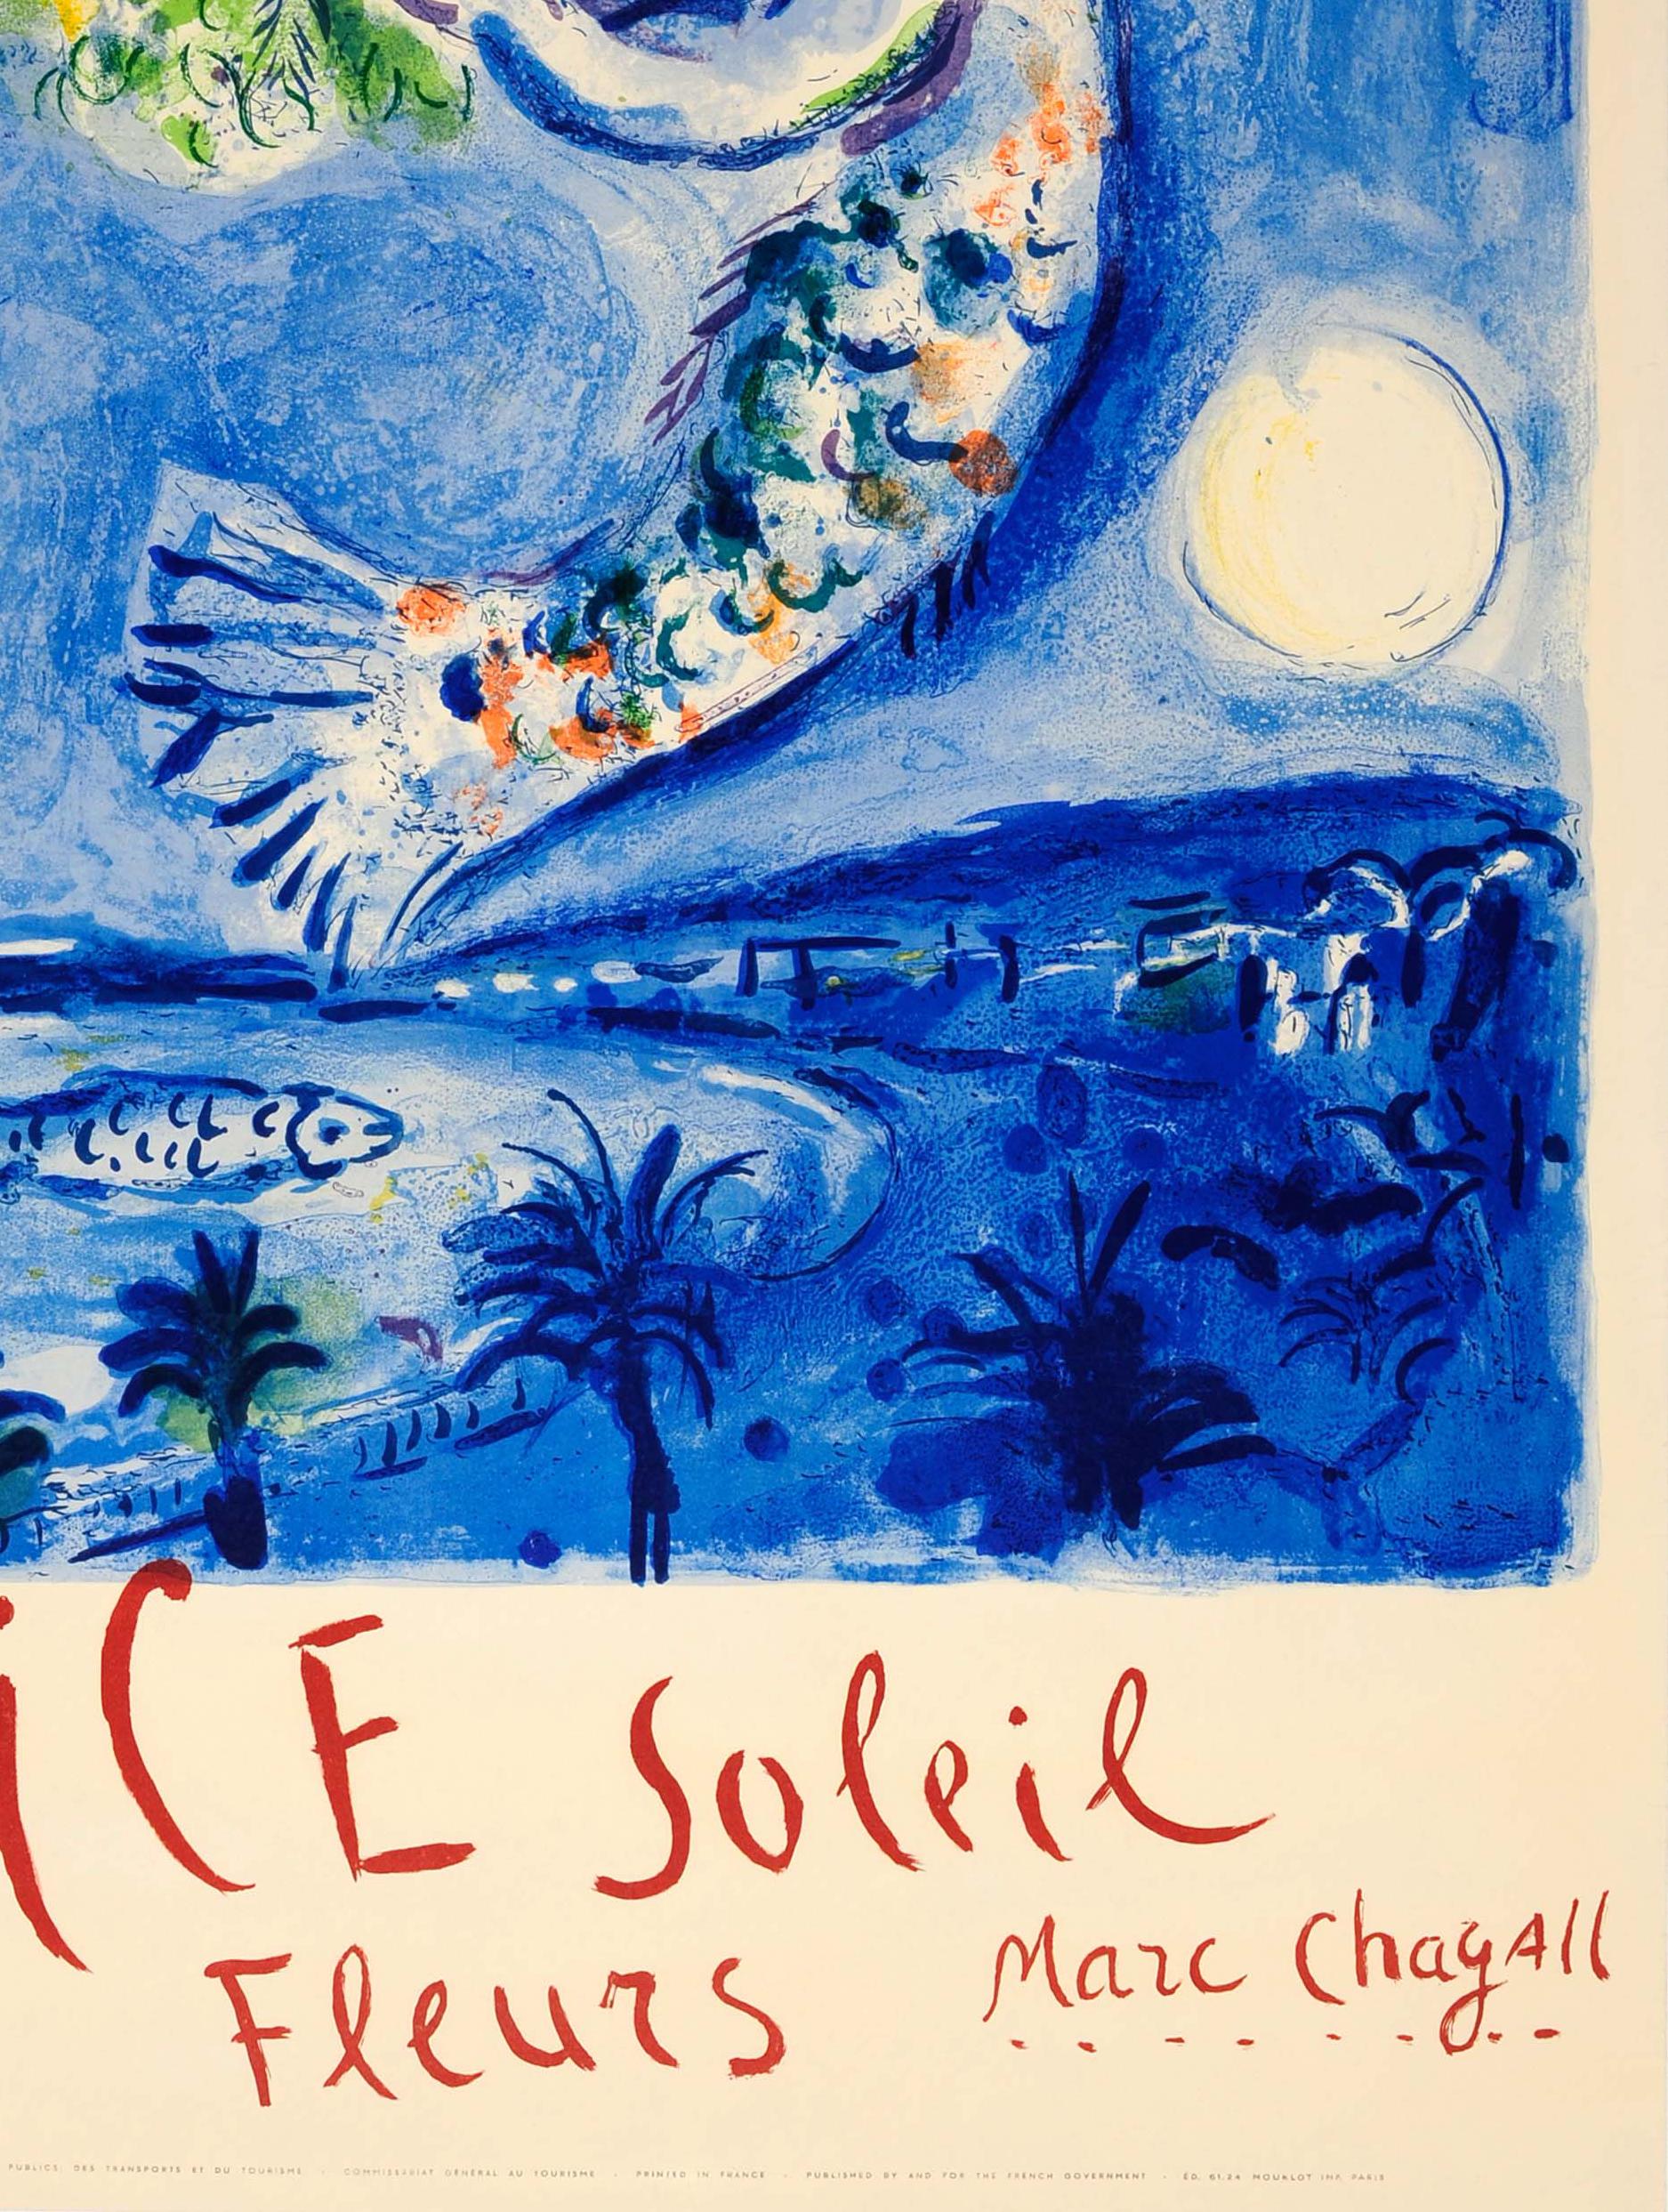 French Original Vintage Travel Poster for Nice Soleil Fleurs Marc Chagall Sun Flowers